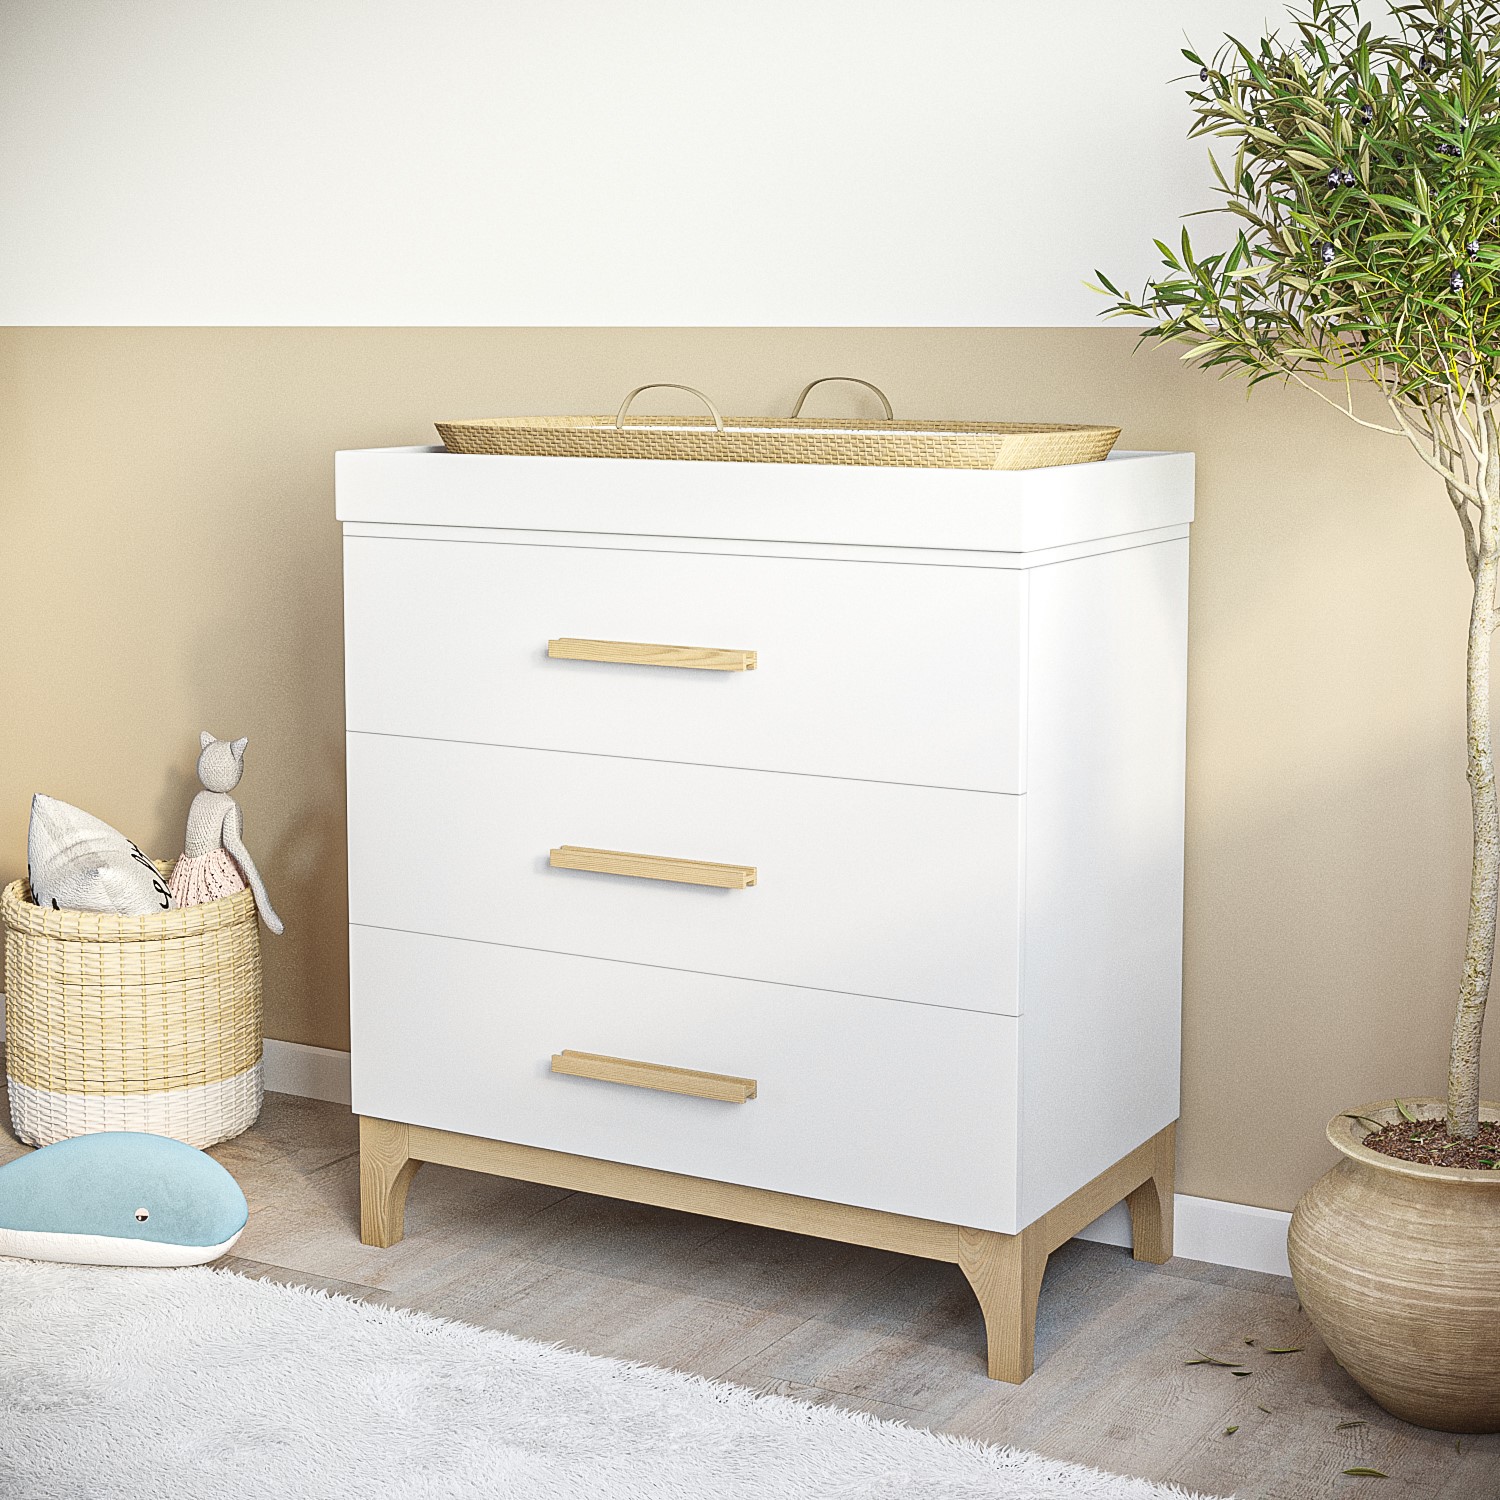 Photo of White and wood baby changing table with drawers - rue